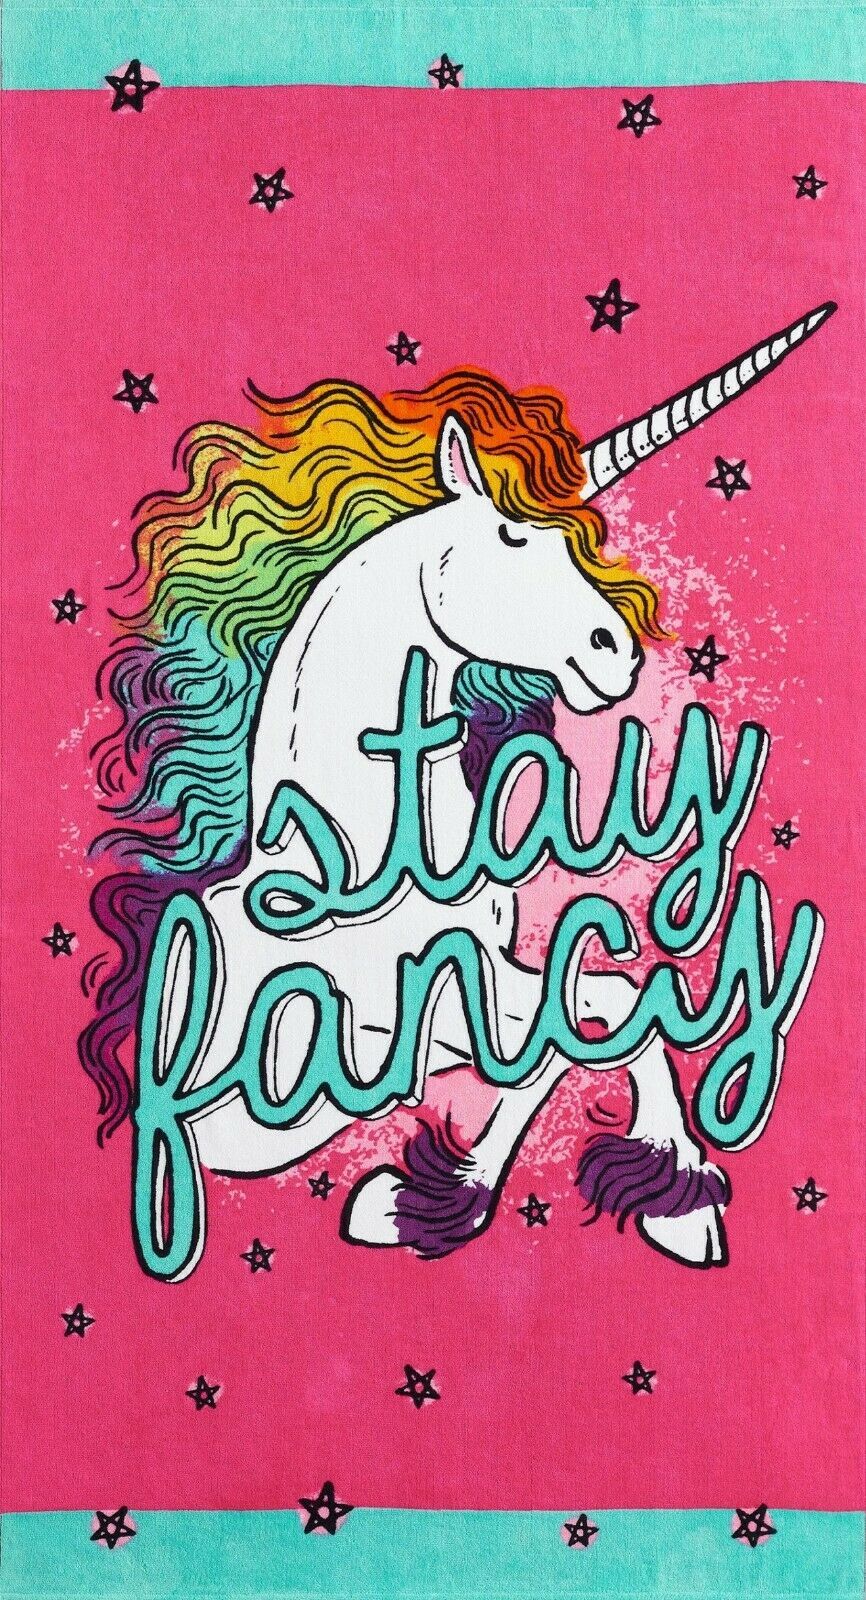 Stay Fancy Unicorn Beach towel measures 34 x 64 inches - $16.78